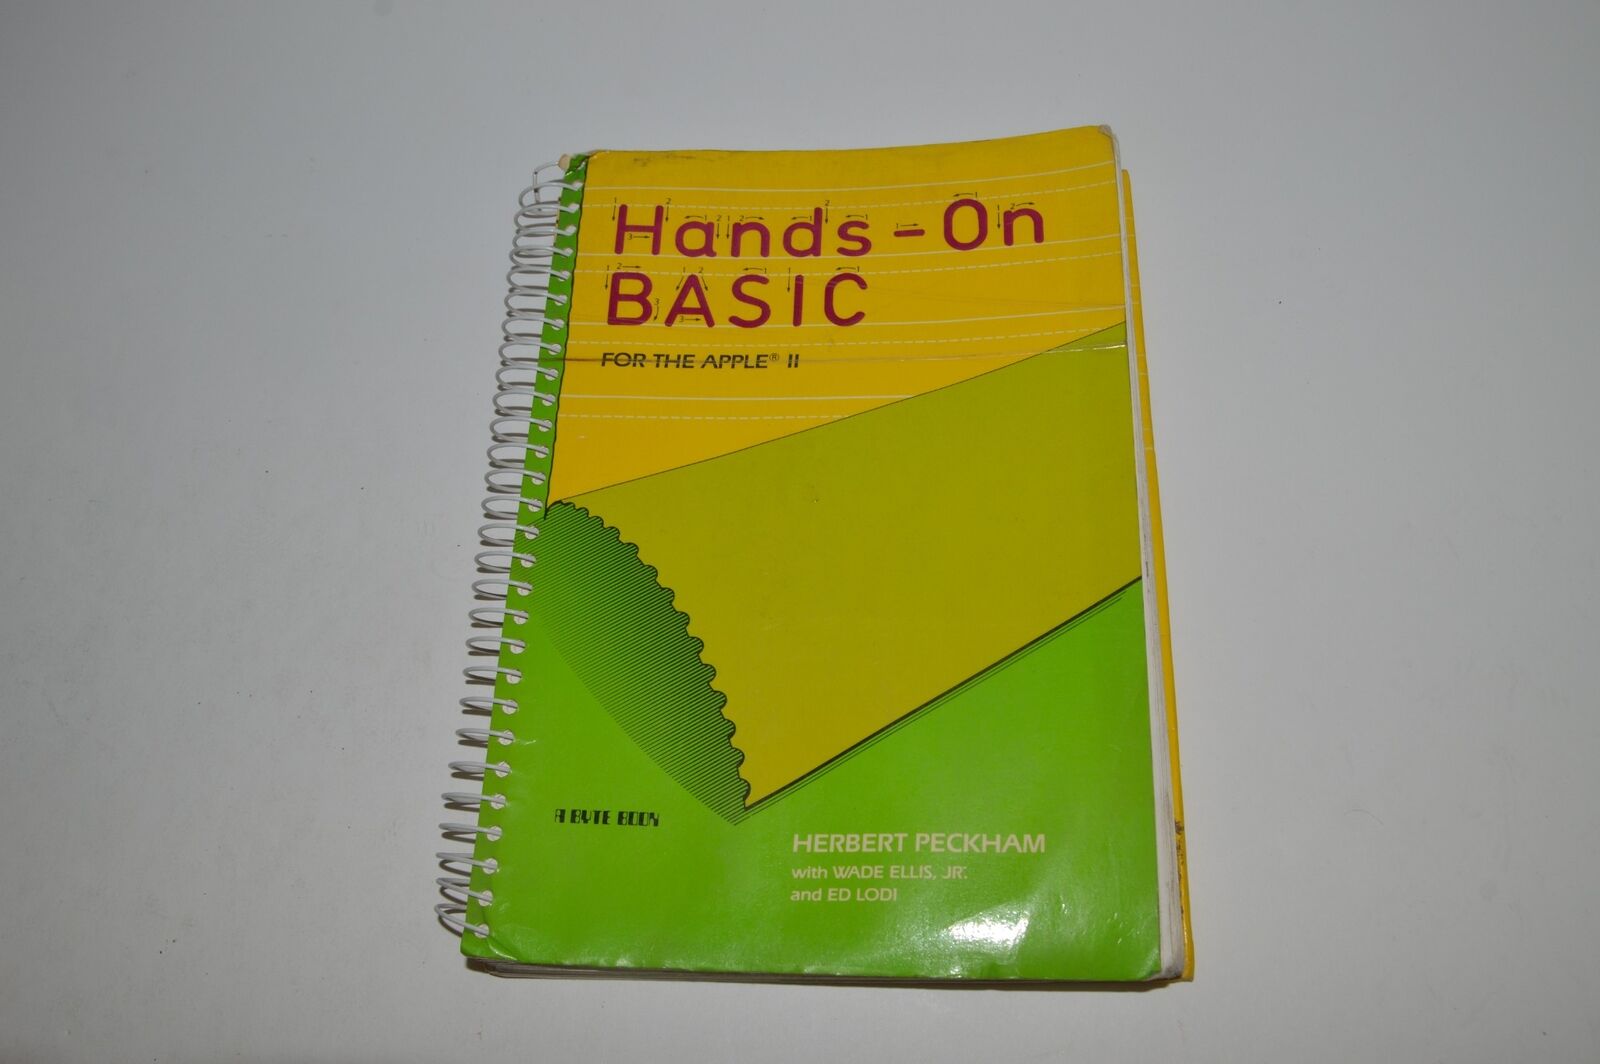 *TC* HANDS-ON BASIC FOR THE APPLE II BY HERBERT PECKHAM 1983 (BOOK951)